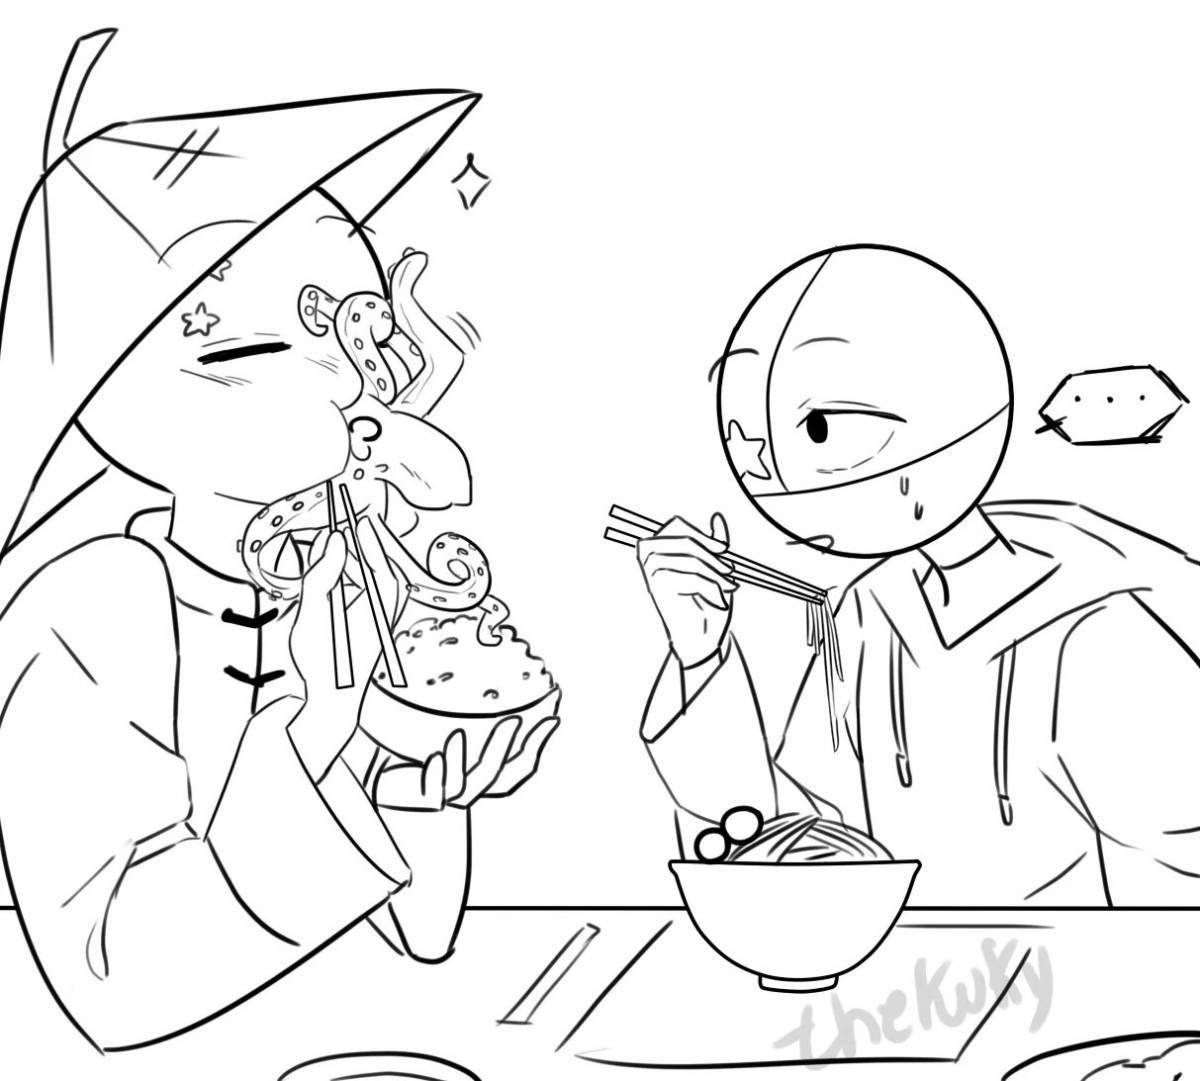 Countryhumans coloring pages with crazy colors